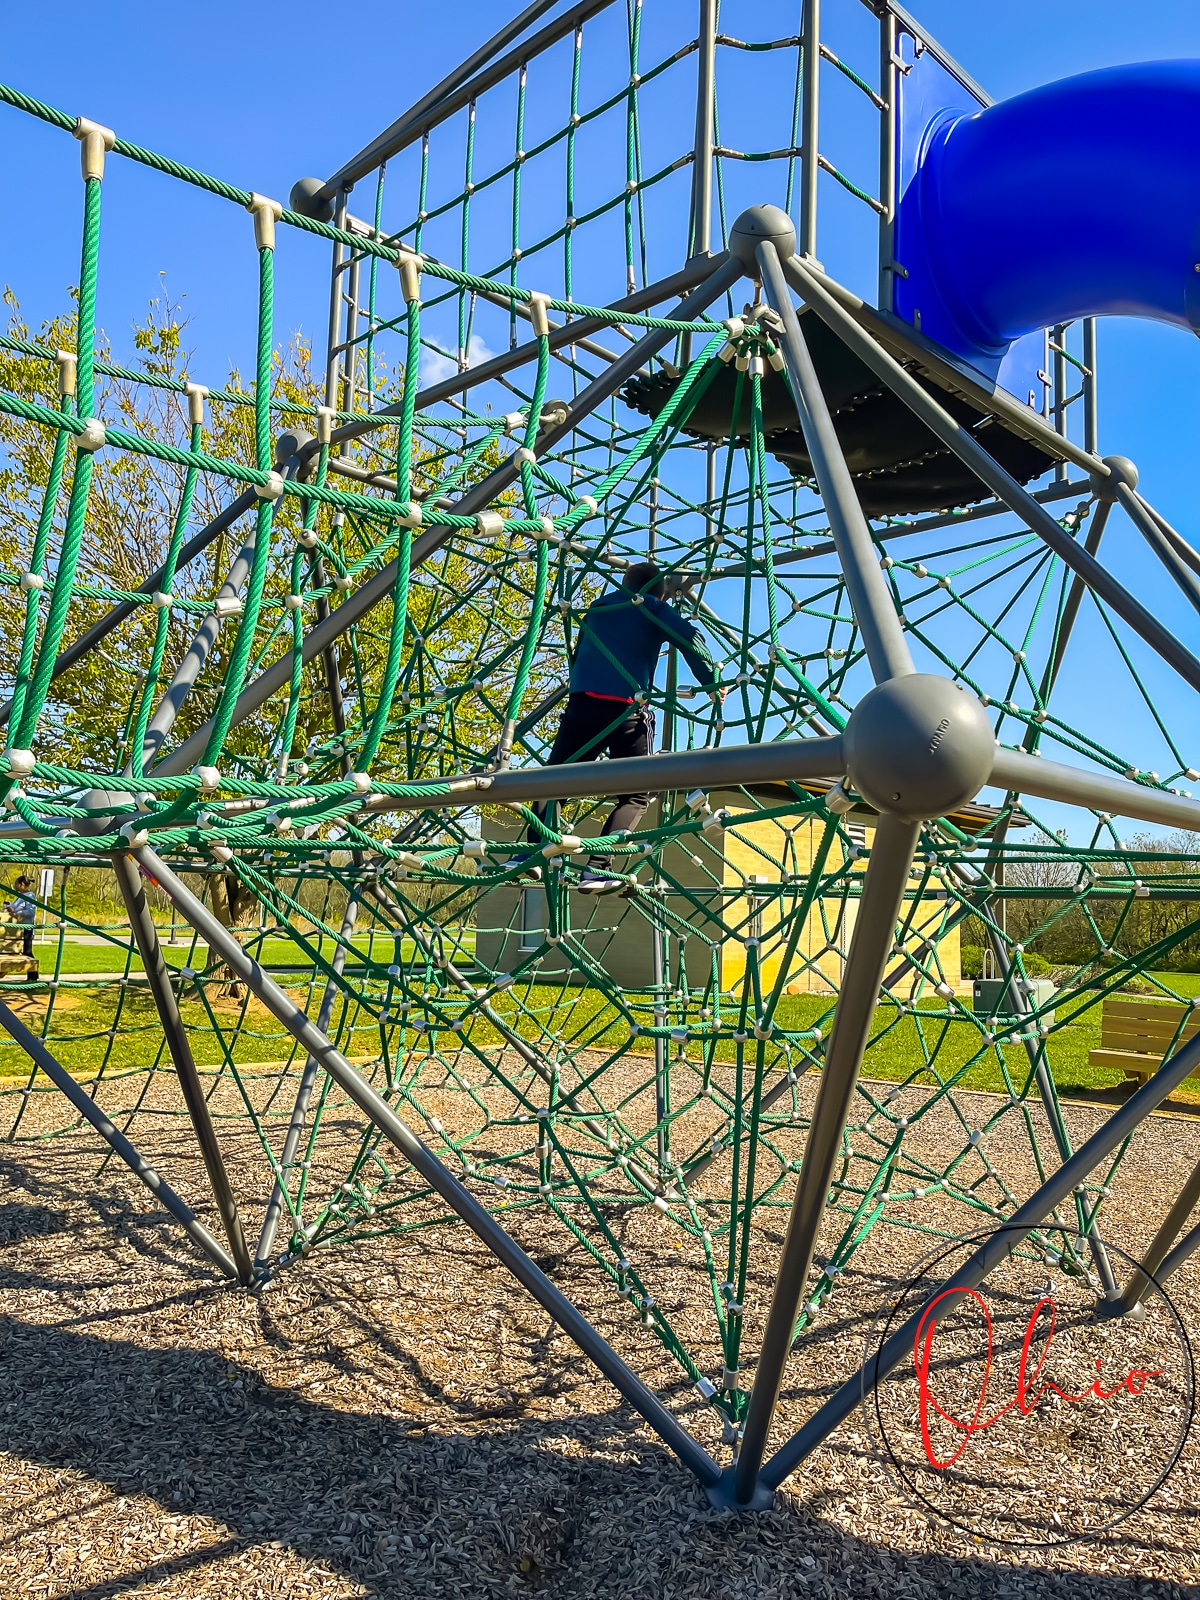 rope course playground with green ropes and brown metal, blue slide, kid crawling up ropes